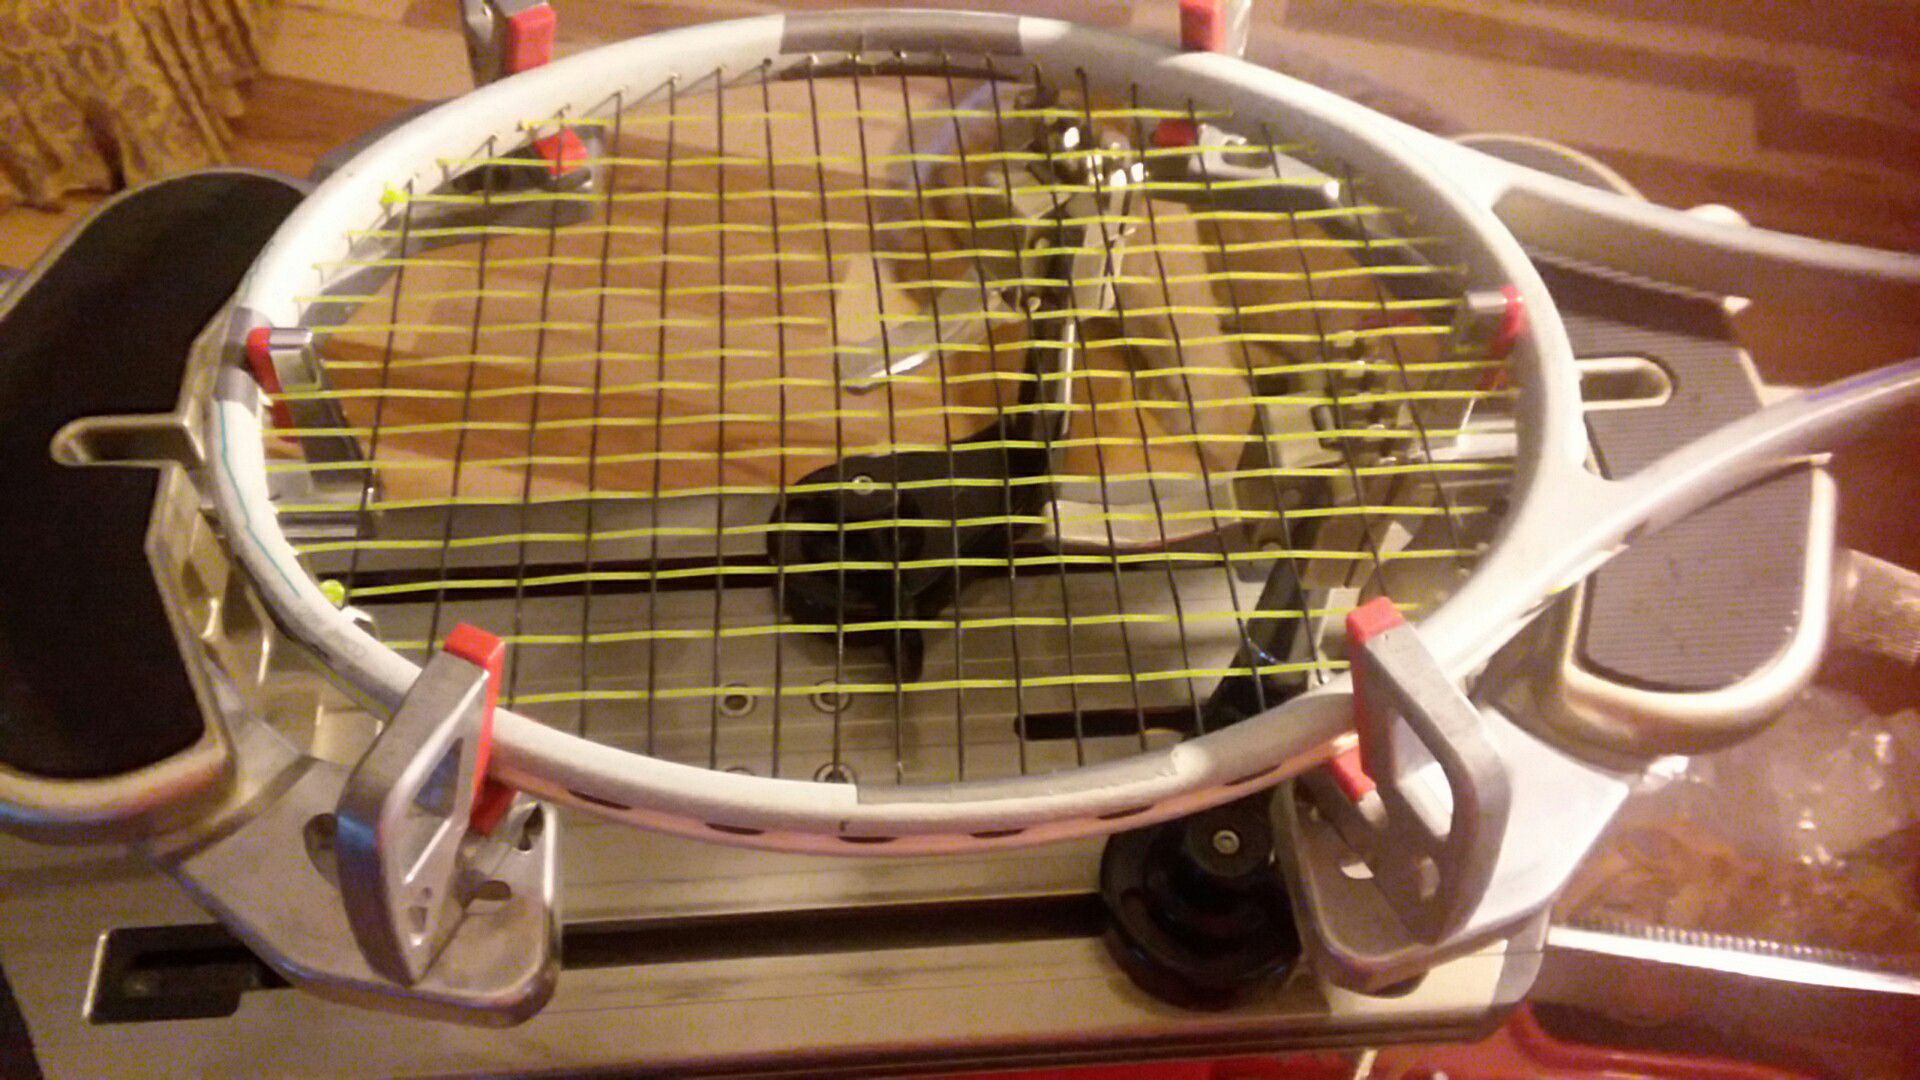 Let me string your tennis racket